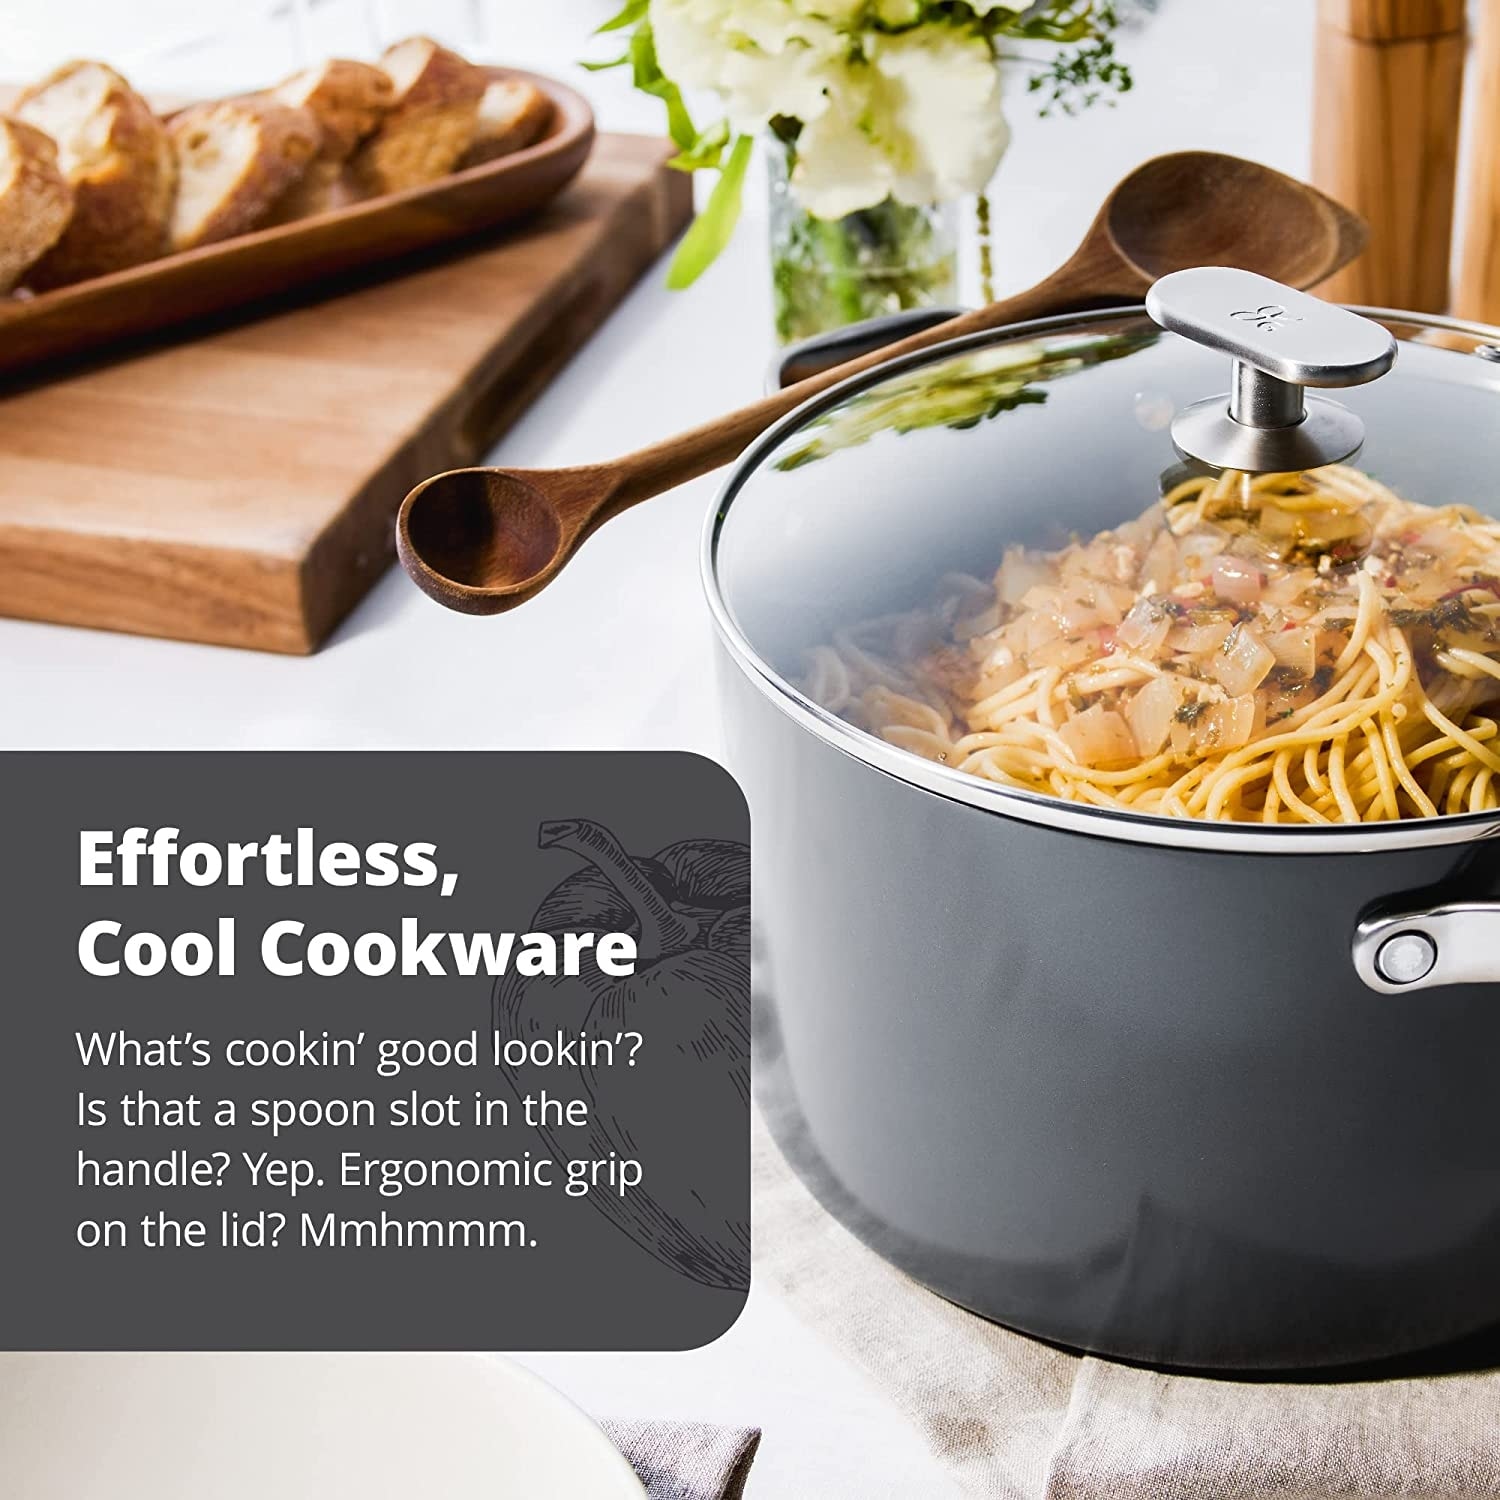 https://ak1.ostkcdn.com/images/products/is/images/direct/2e90eecc02571e9eceac0f8a3cebeb2fea28783a/Party-of-Four-Cook-Kit---10-Piece-Nonstick-Cookware-Set-for-a-Complete-Kitchen.jpg